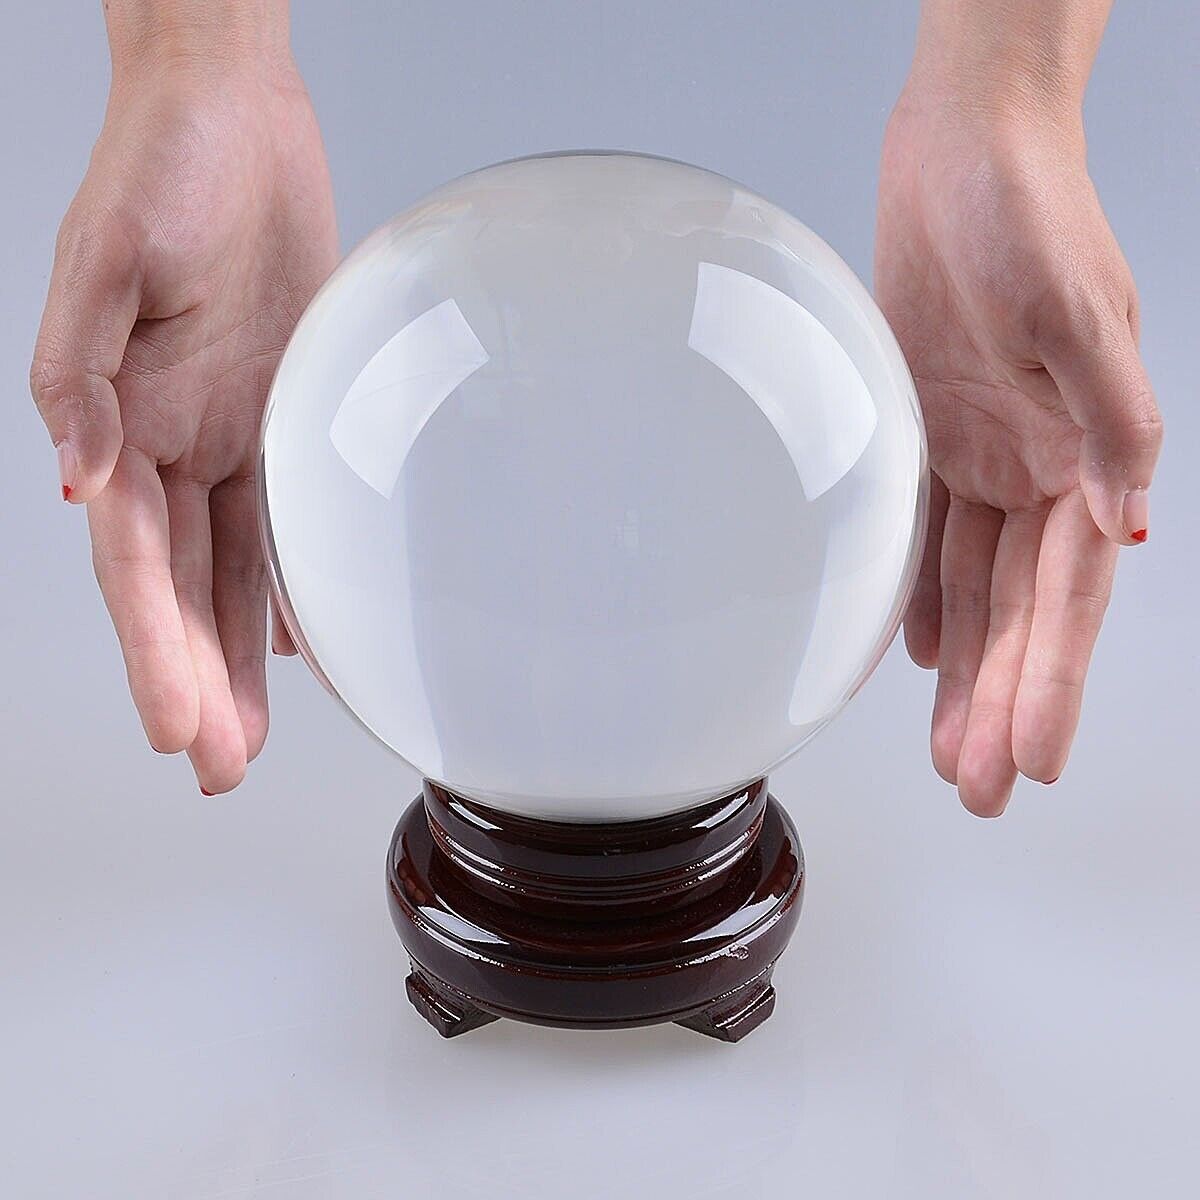 LONGWIN 150MM Clear Crystal Ball 6Inch Glass Sphere Photo Prop Free Stand